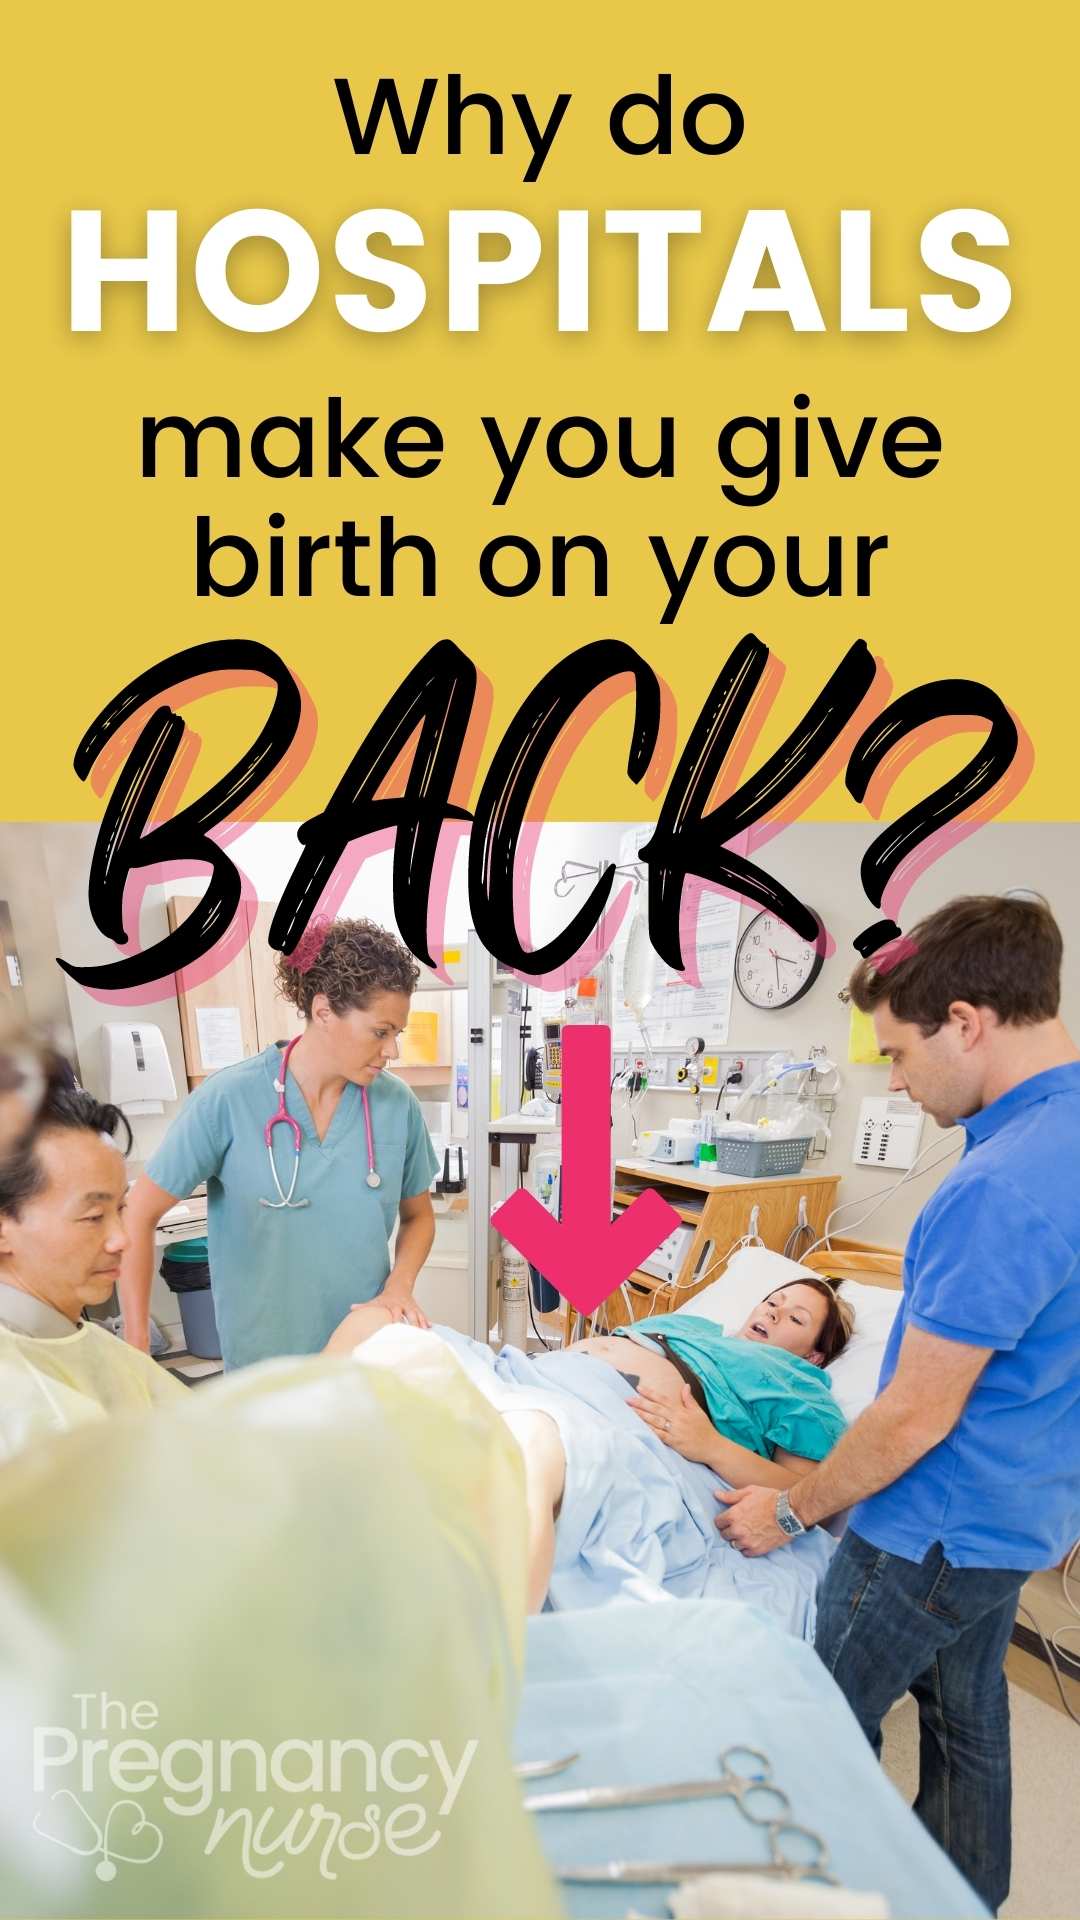 woman givnig birth on her back / why do hospitals make you give birth on your back?